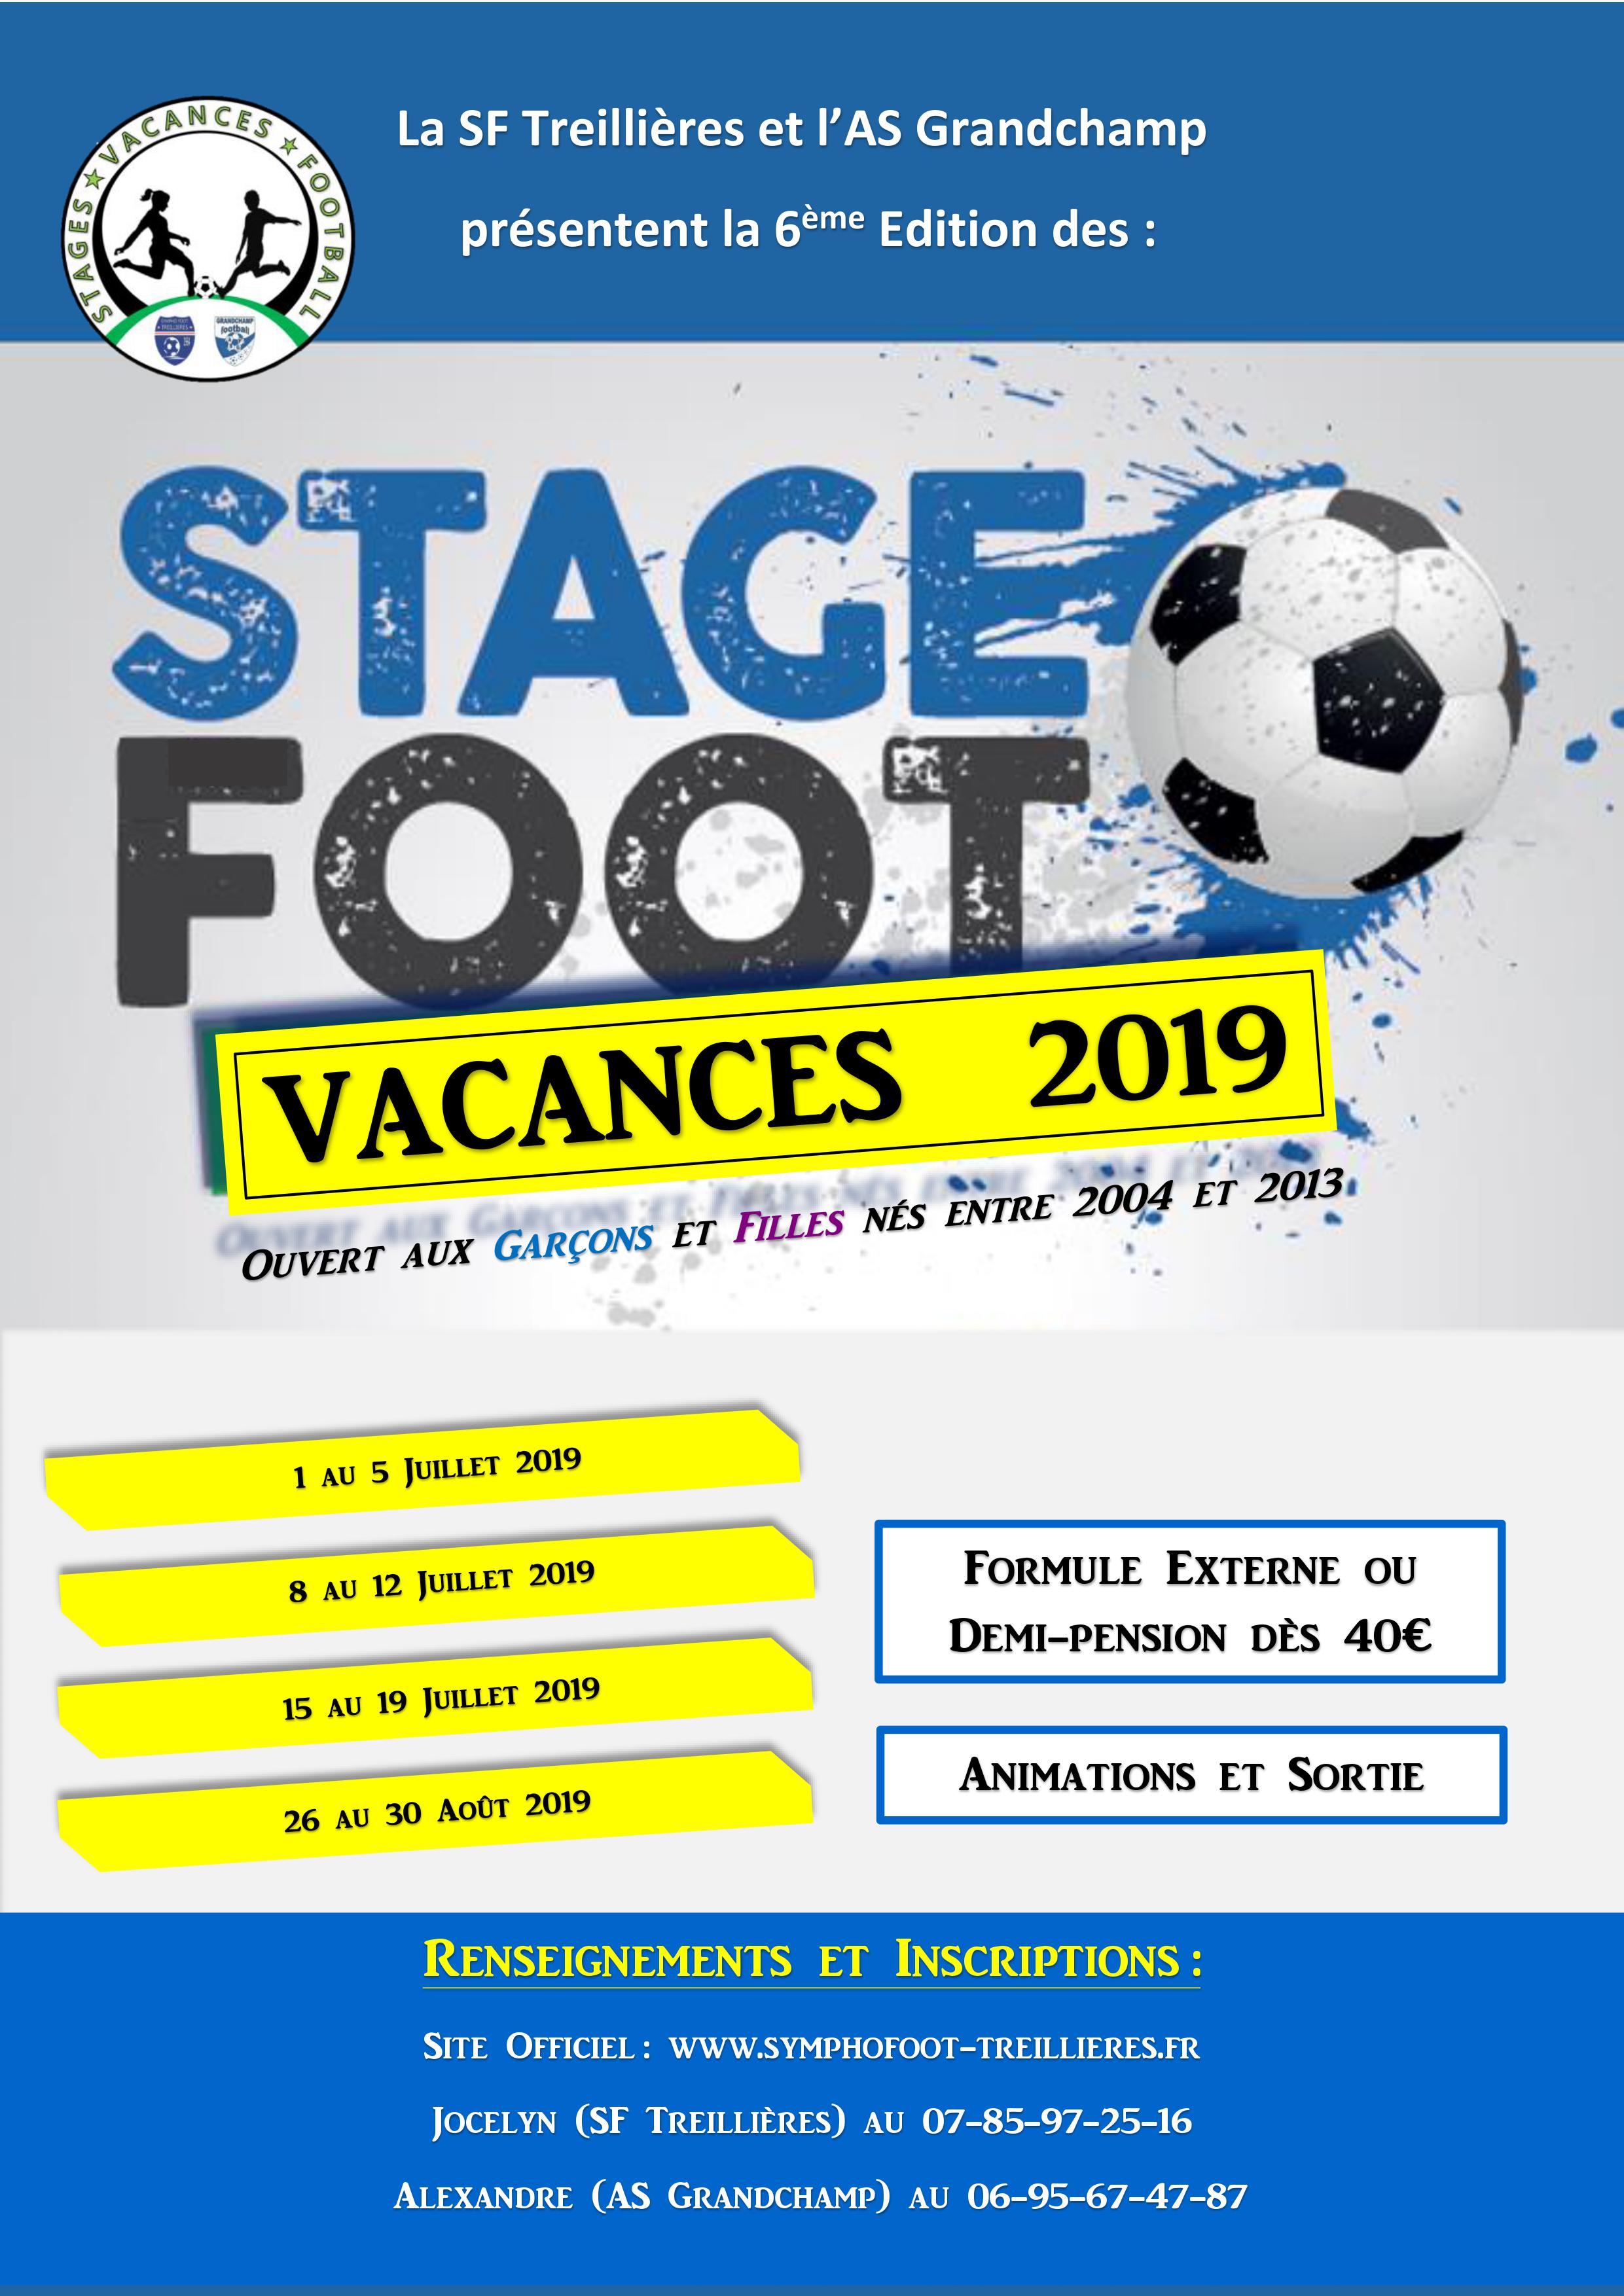 Stages "vacances" foot